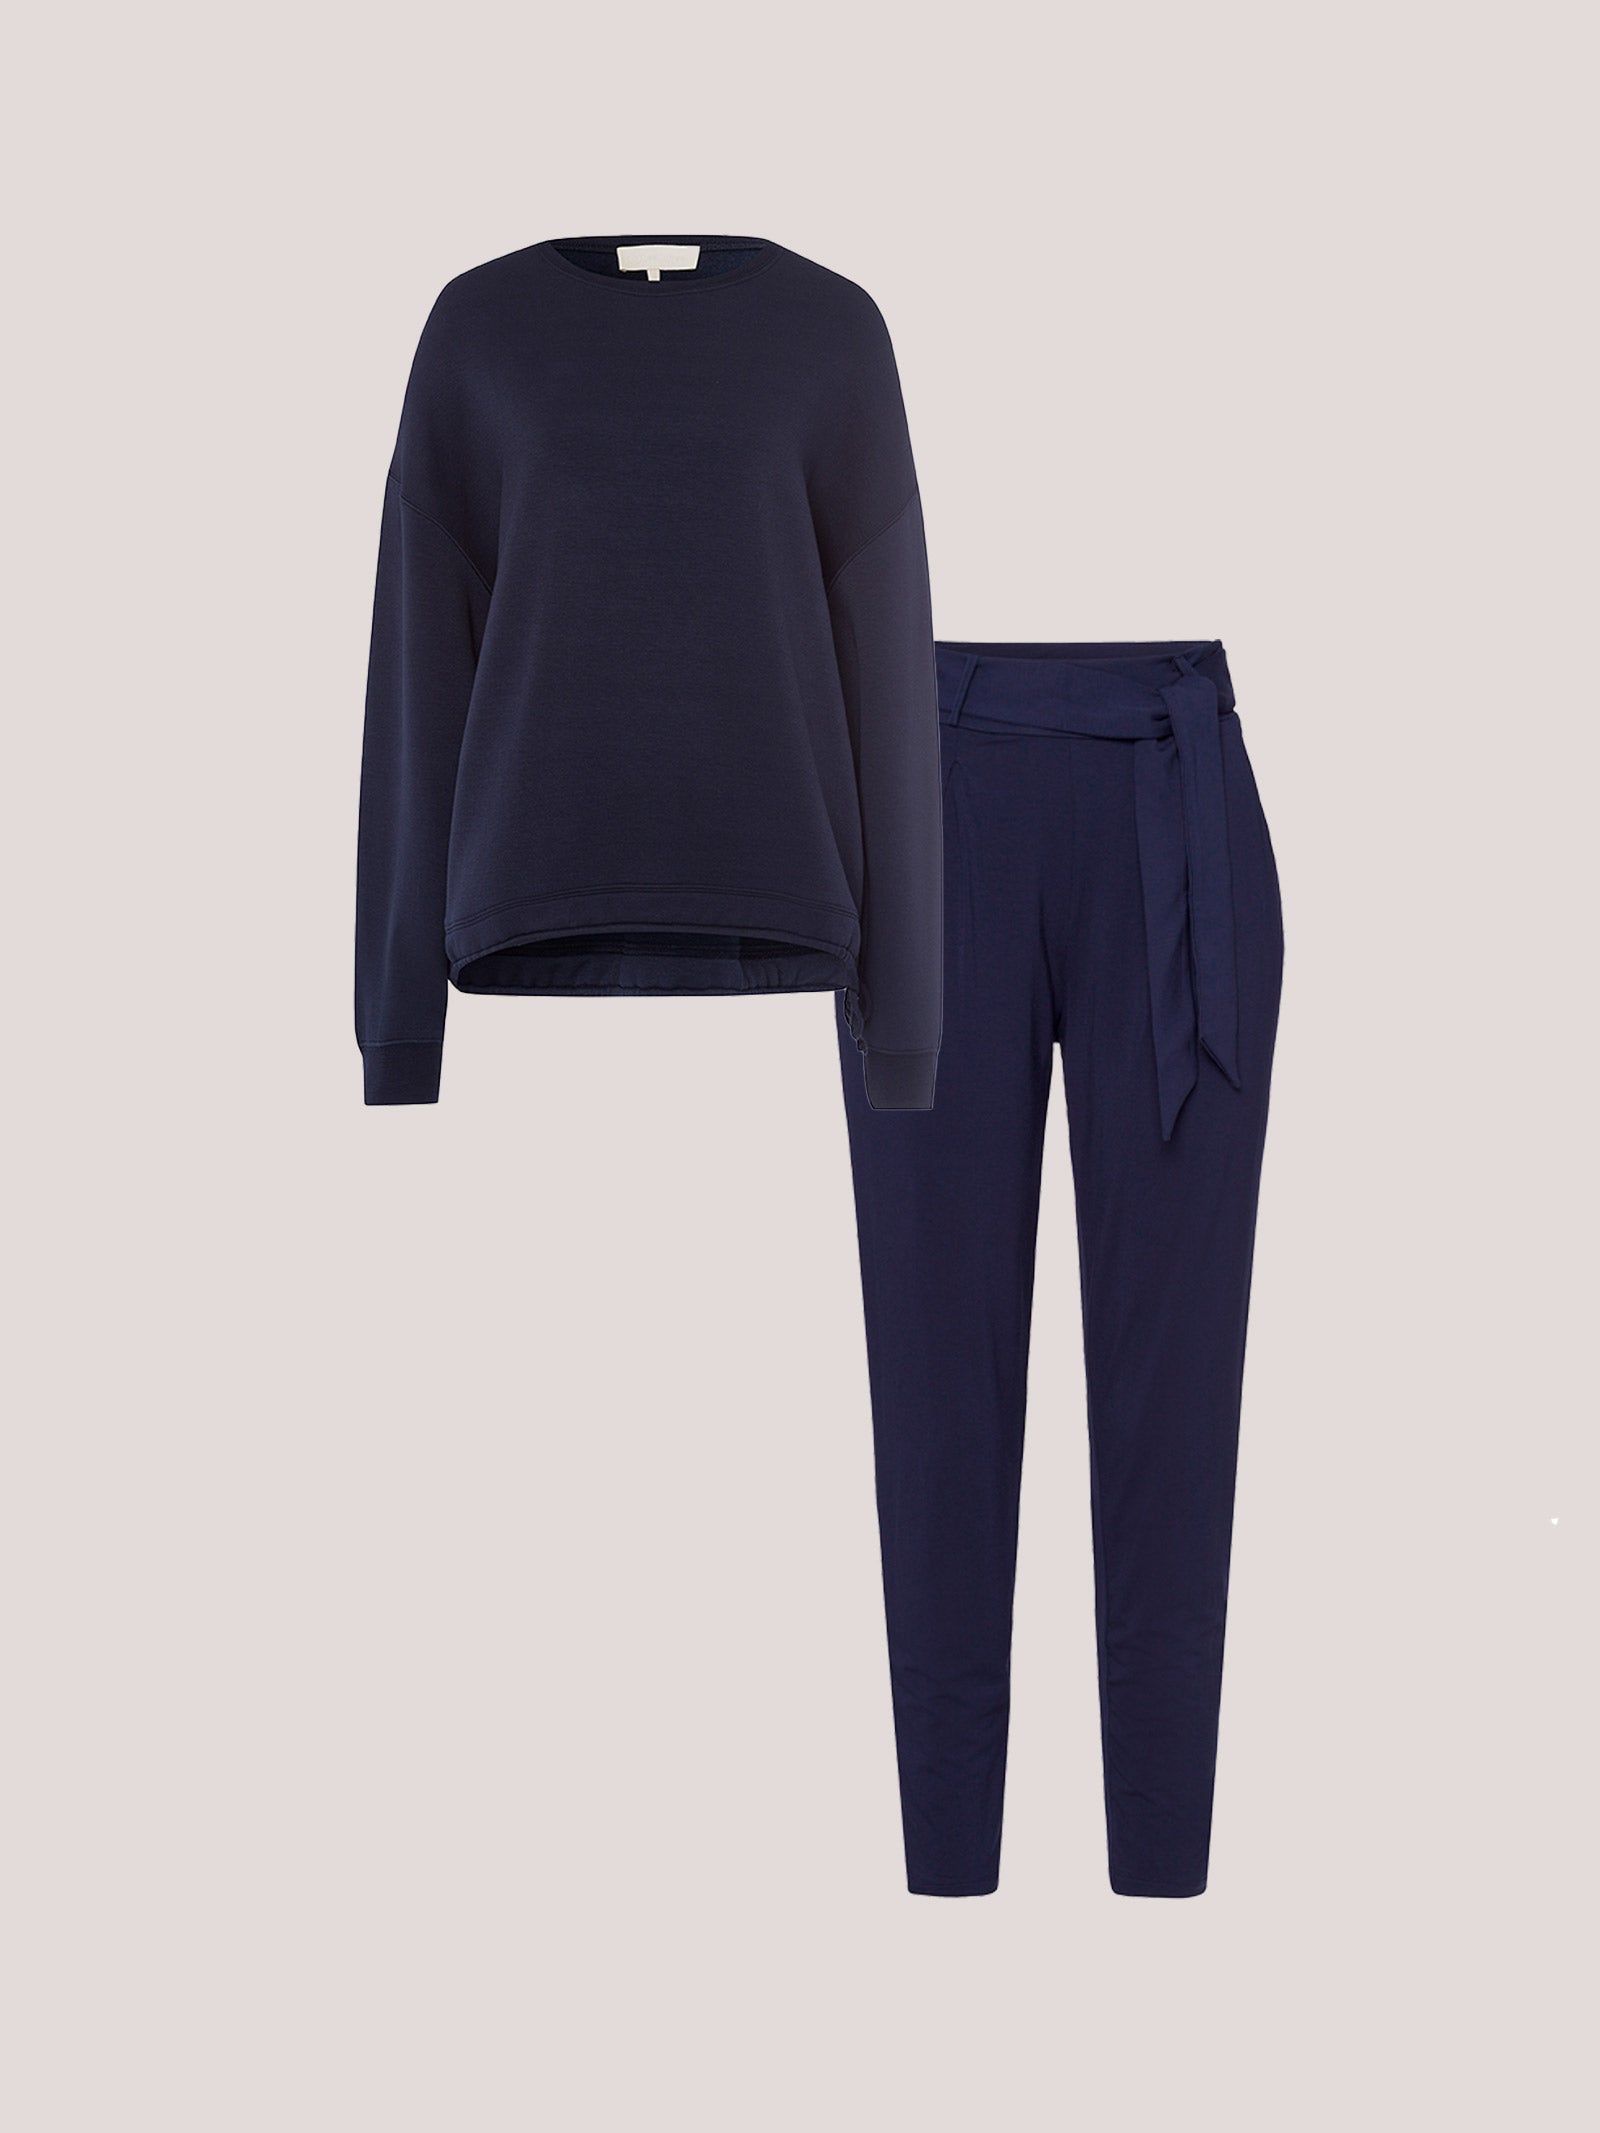 Buy Navy Blue Trousers & Pants for Men by JADE BLUE Online | Ajio.com